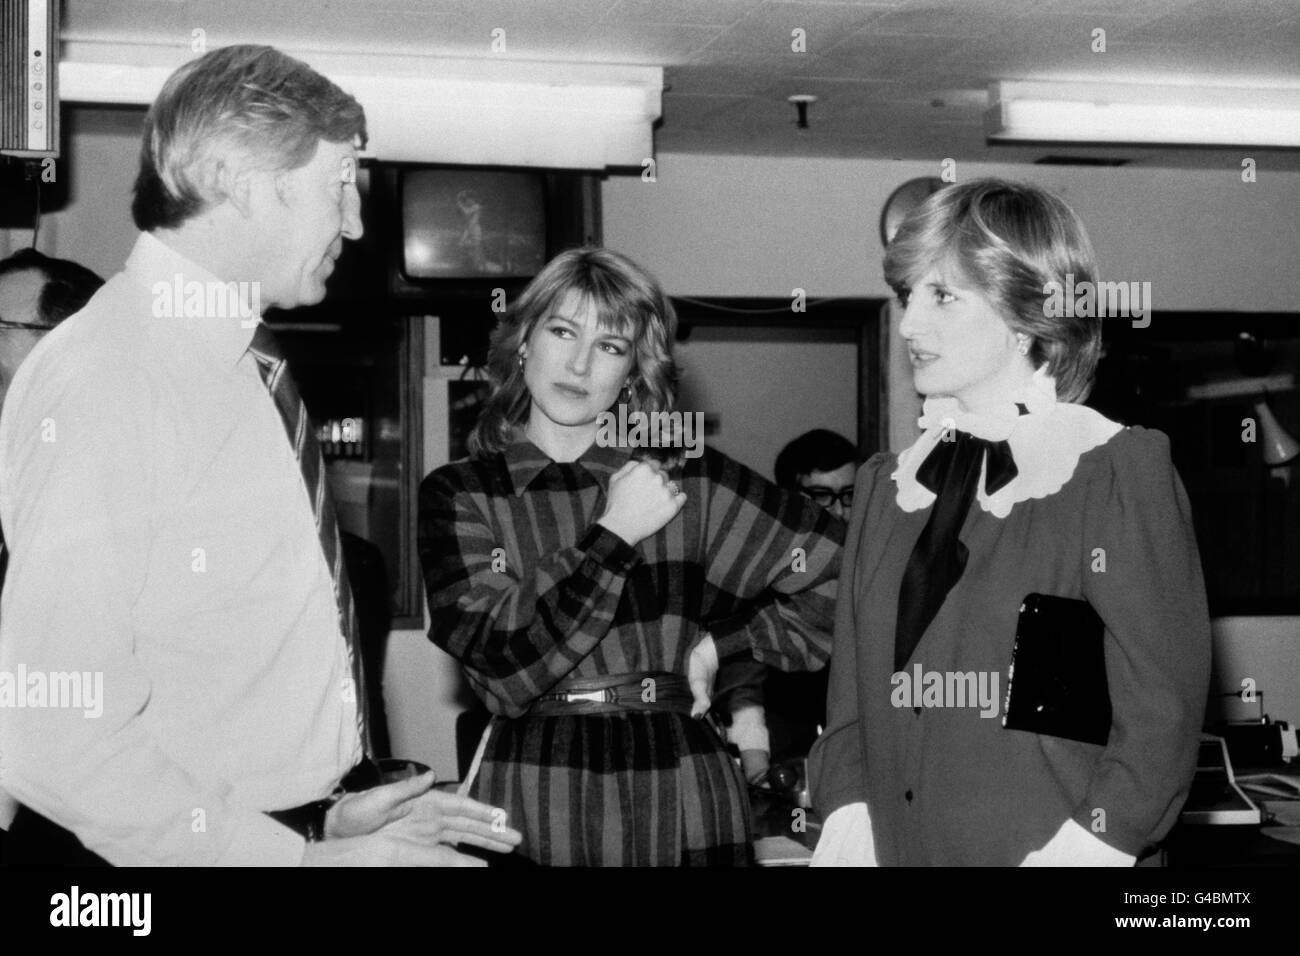 Princess Diana, the Princess of Wales, listens as Sandy Gall and Selina Scott, newscasters for News at Ten programme , explain the preparation for the broadcast during her visit to the ITN offices. Stock Photo